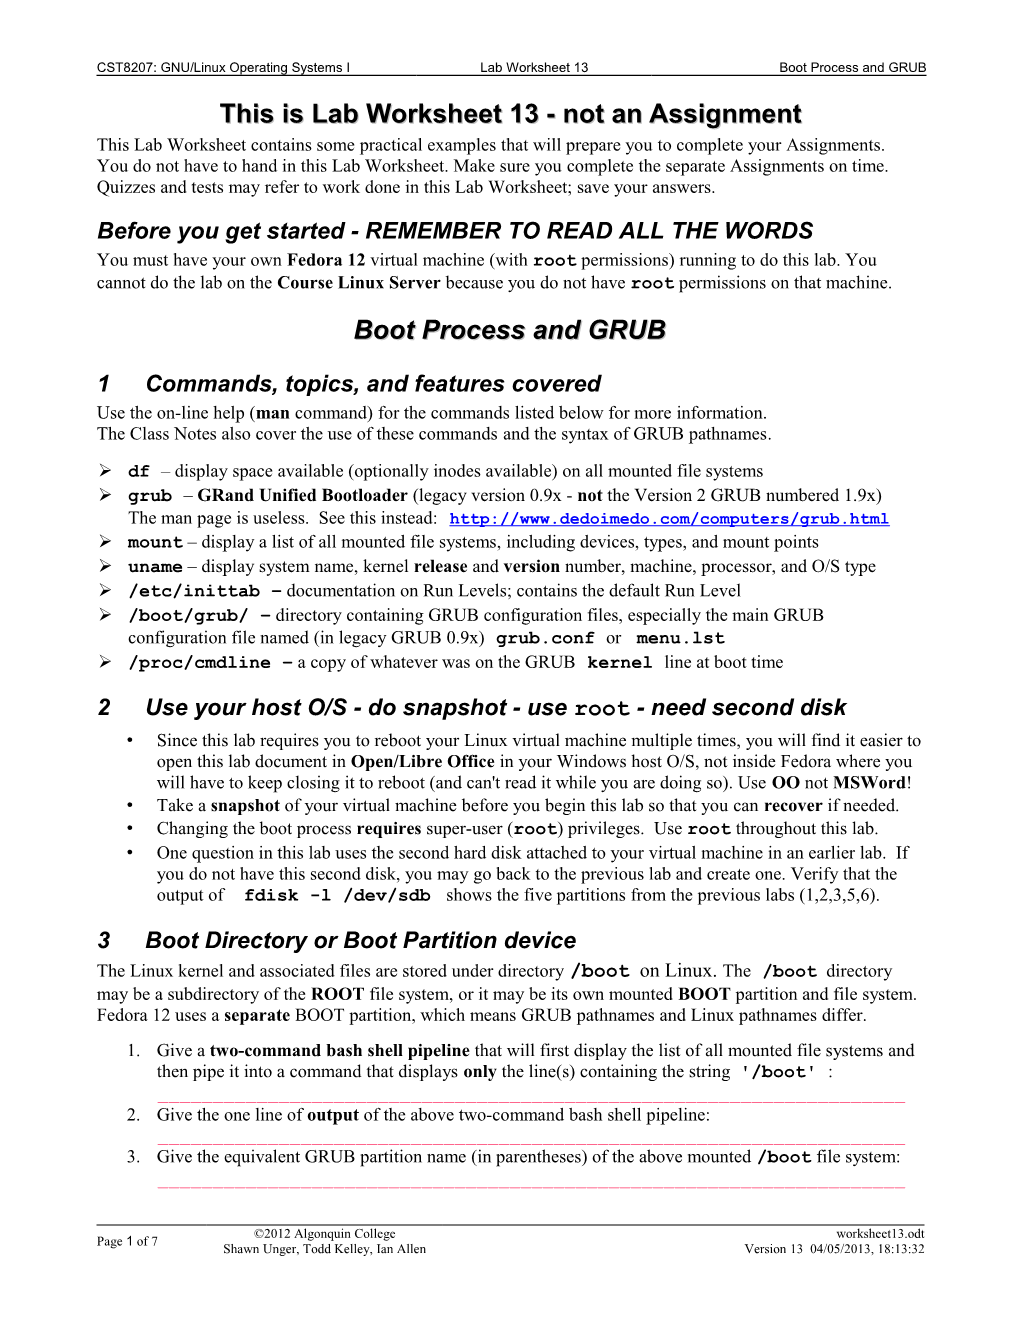 Lab Worksheet 13 Boot Process and GRUB